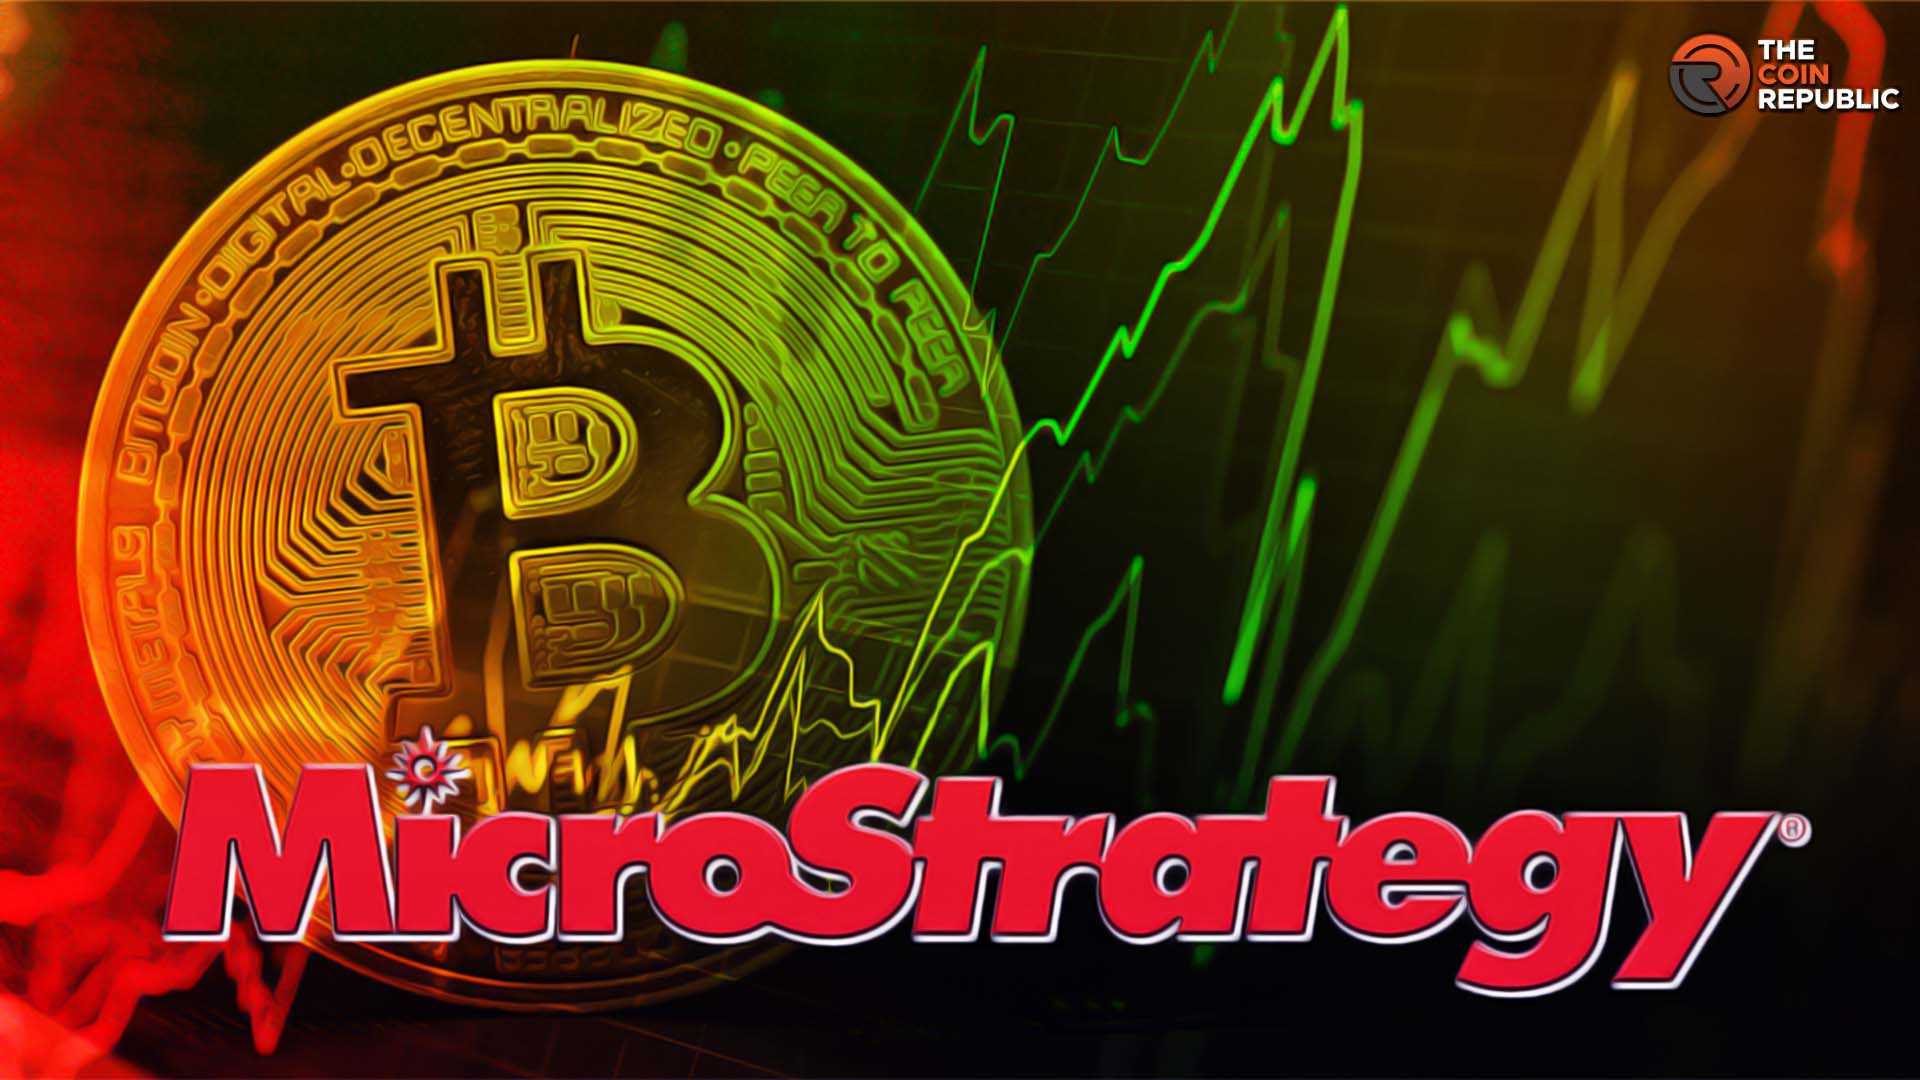 Microstrategy Bought 5,445 Bitcoins Since August for Around $147M